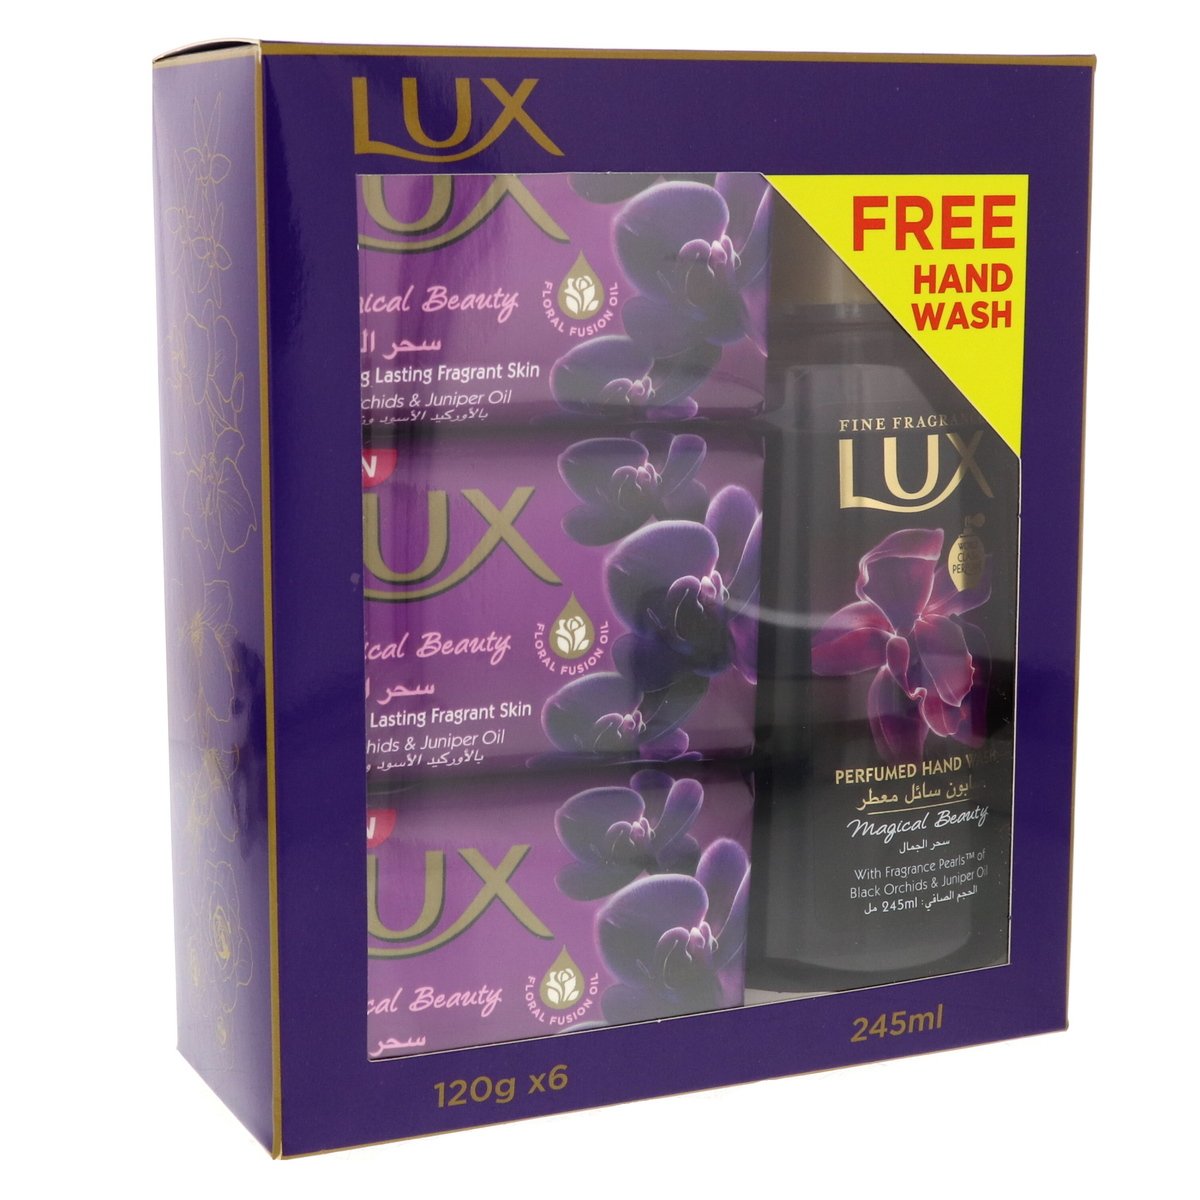 Lux Soap 6 x 120 g + Hand wash 245 ml Assorted